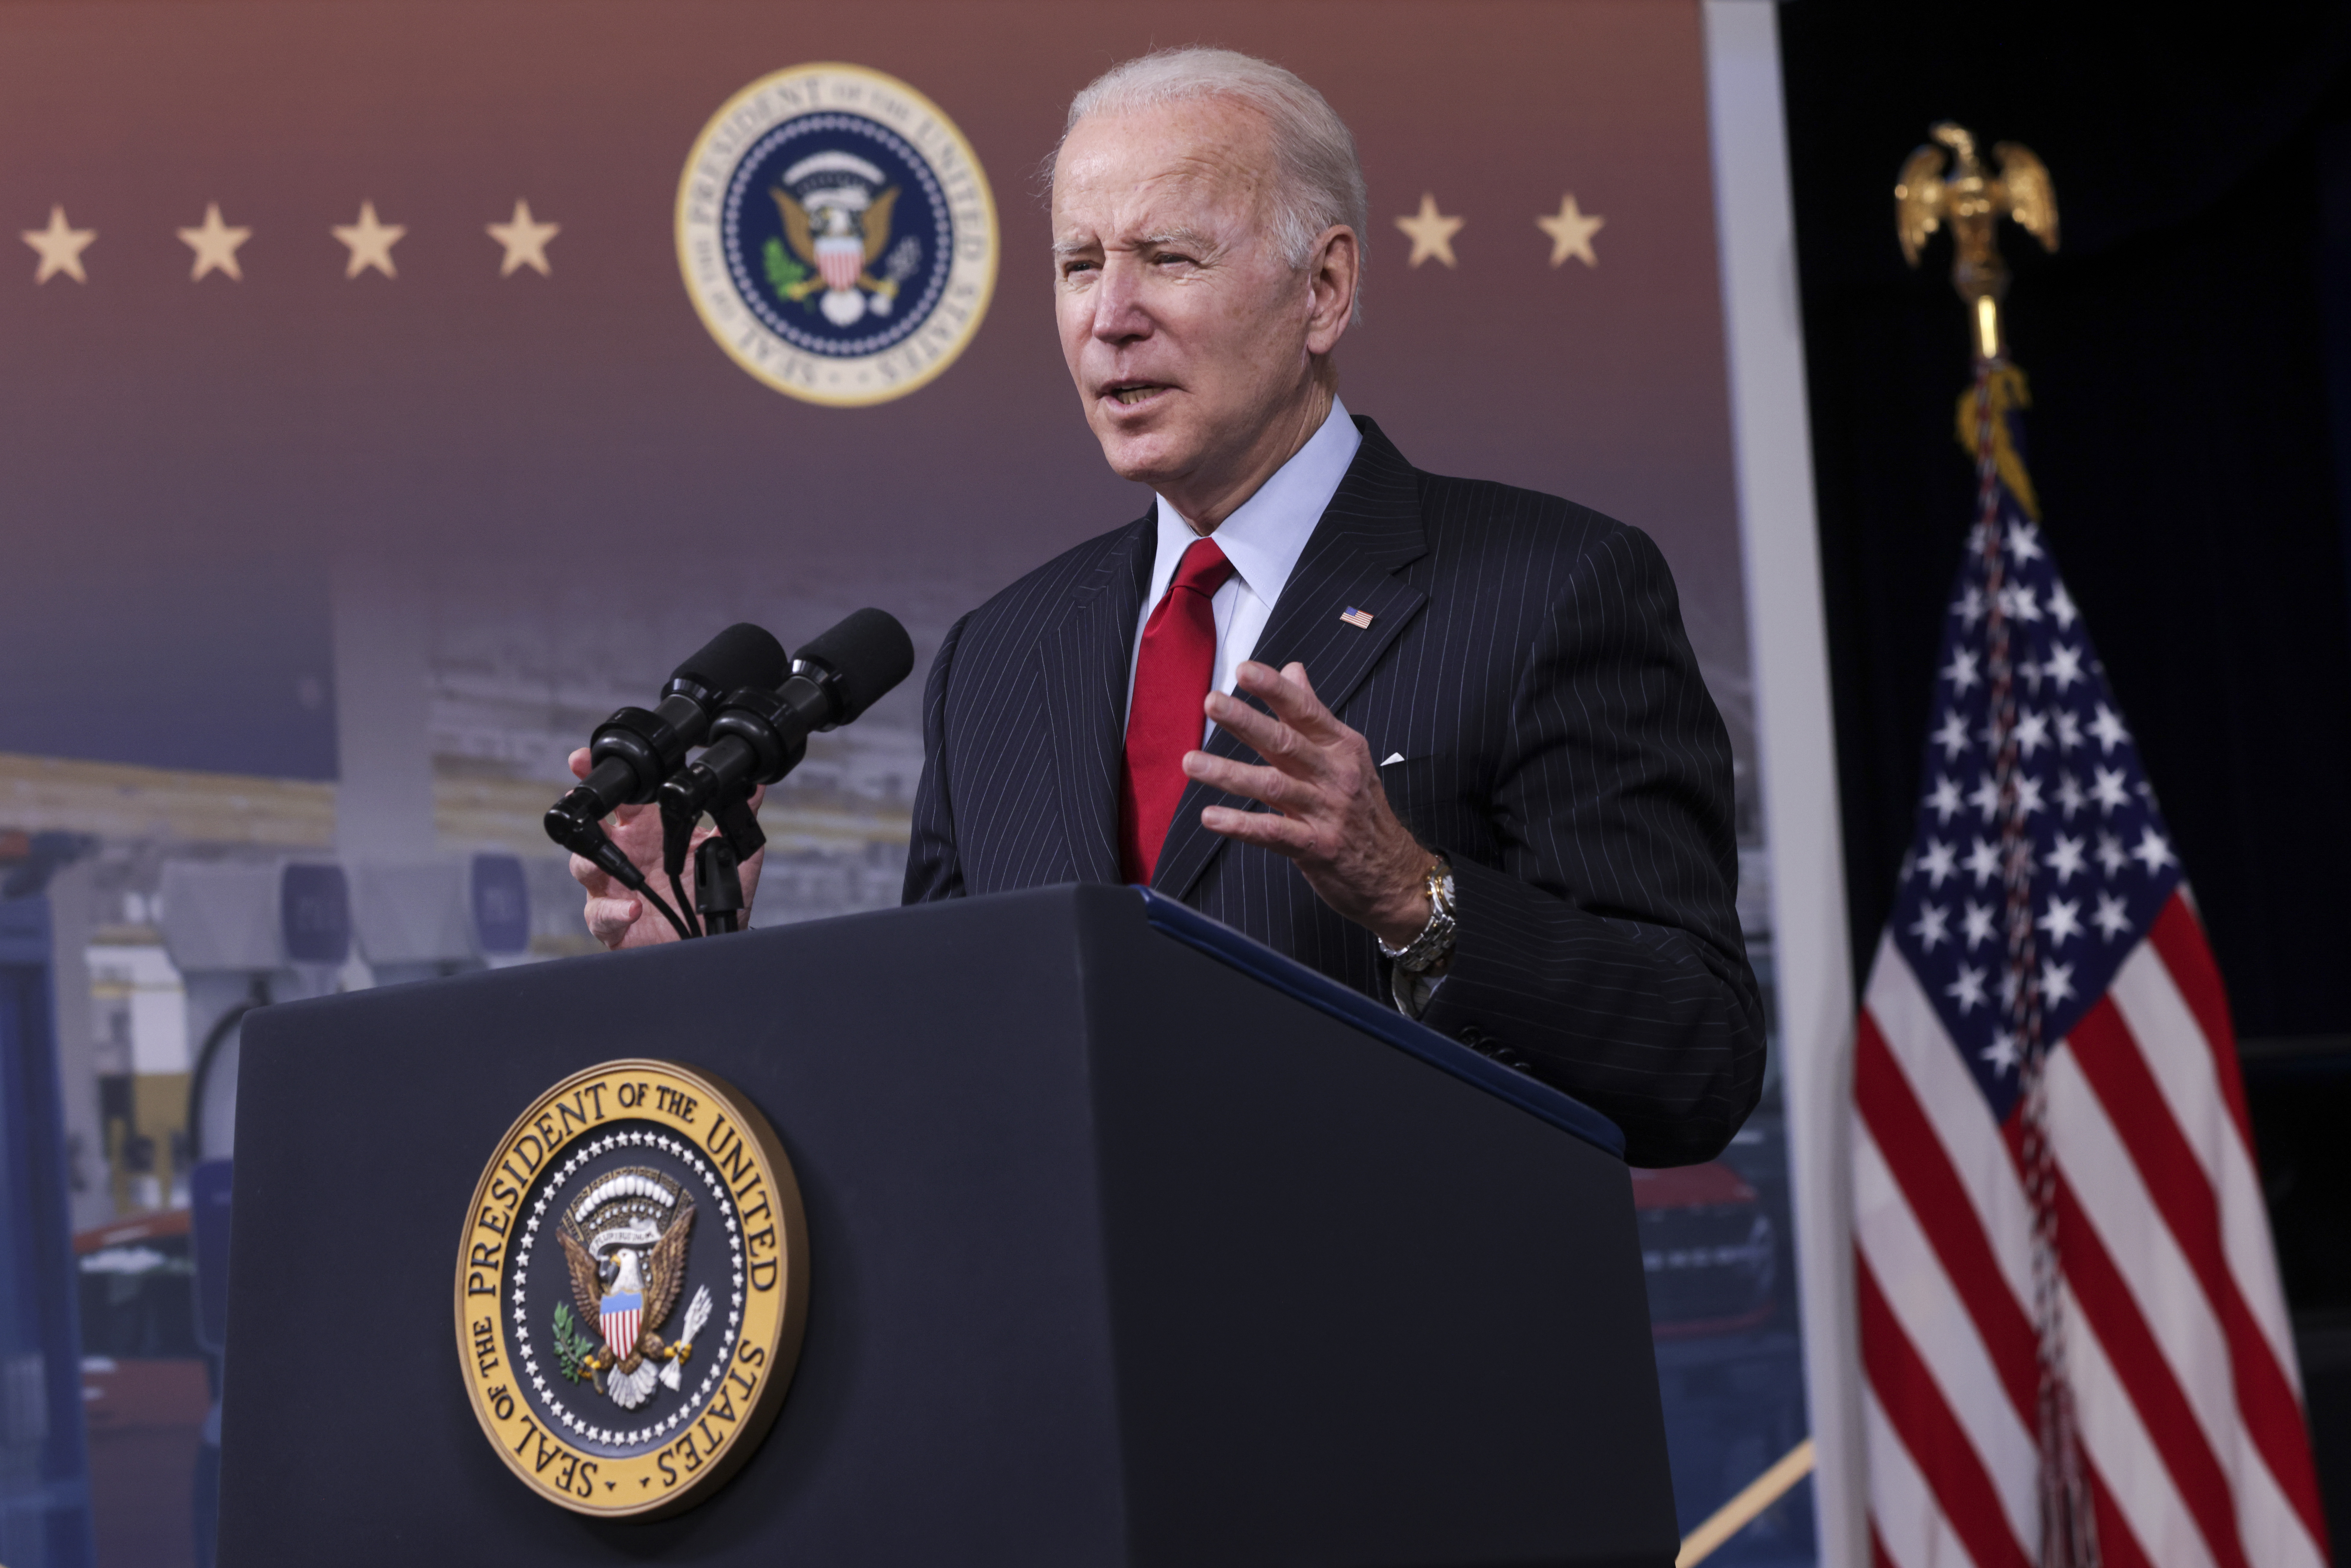 President Joe Biden speaks on the economy during an event Tuesday. (Alex Wong/Getty Images)